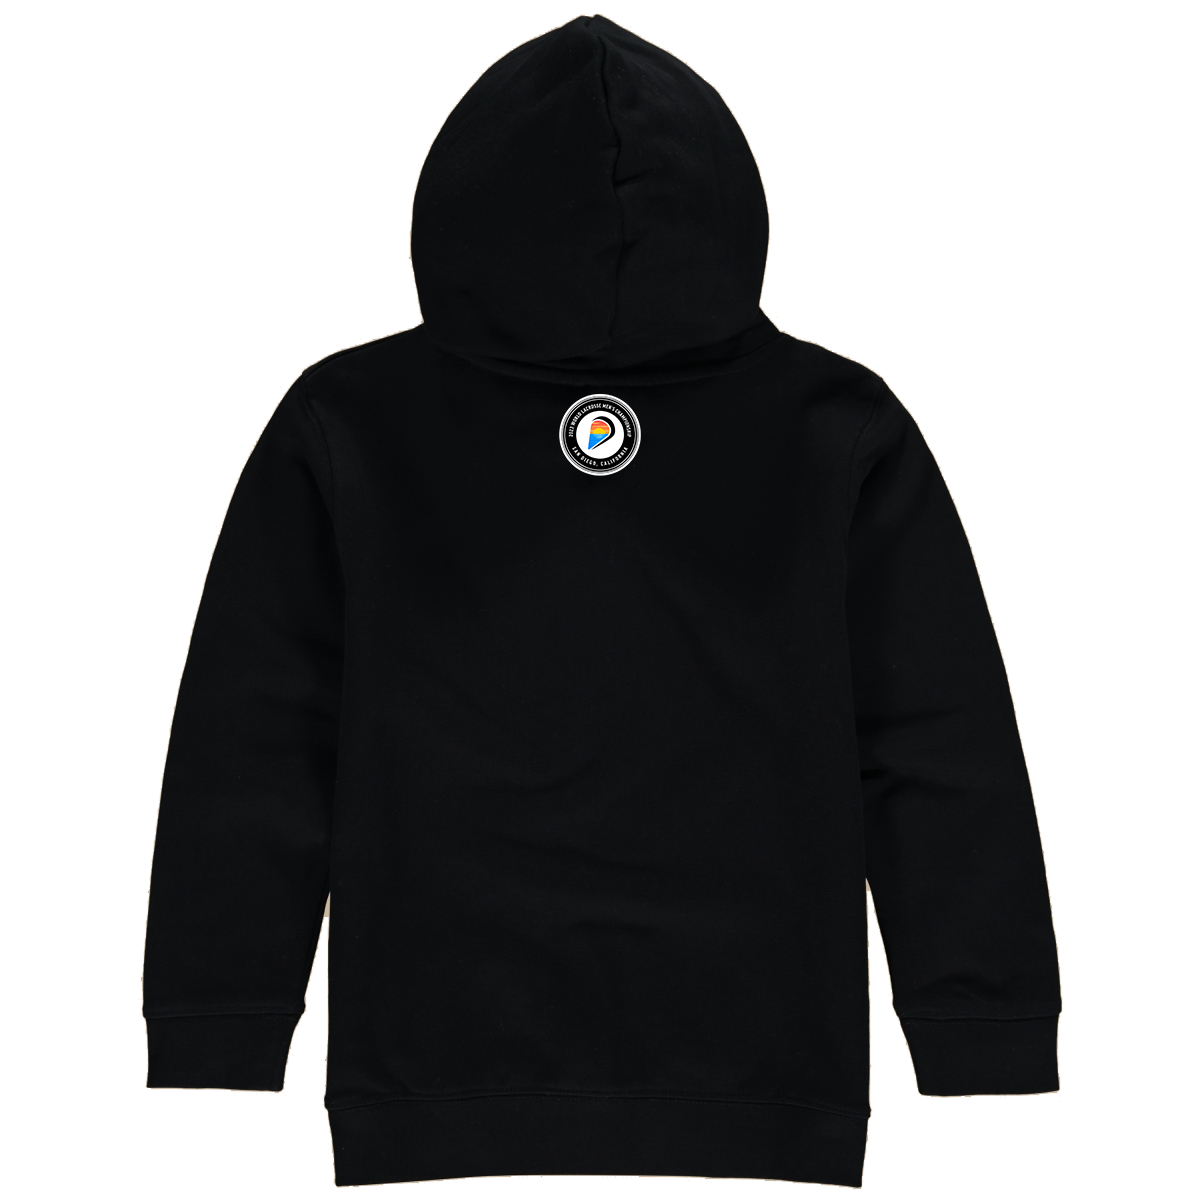 Germany Classic Youth Hoodie Black